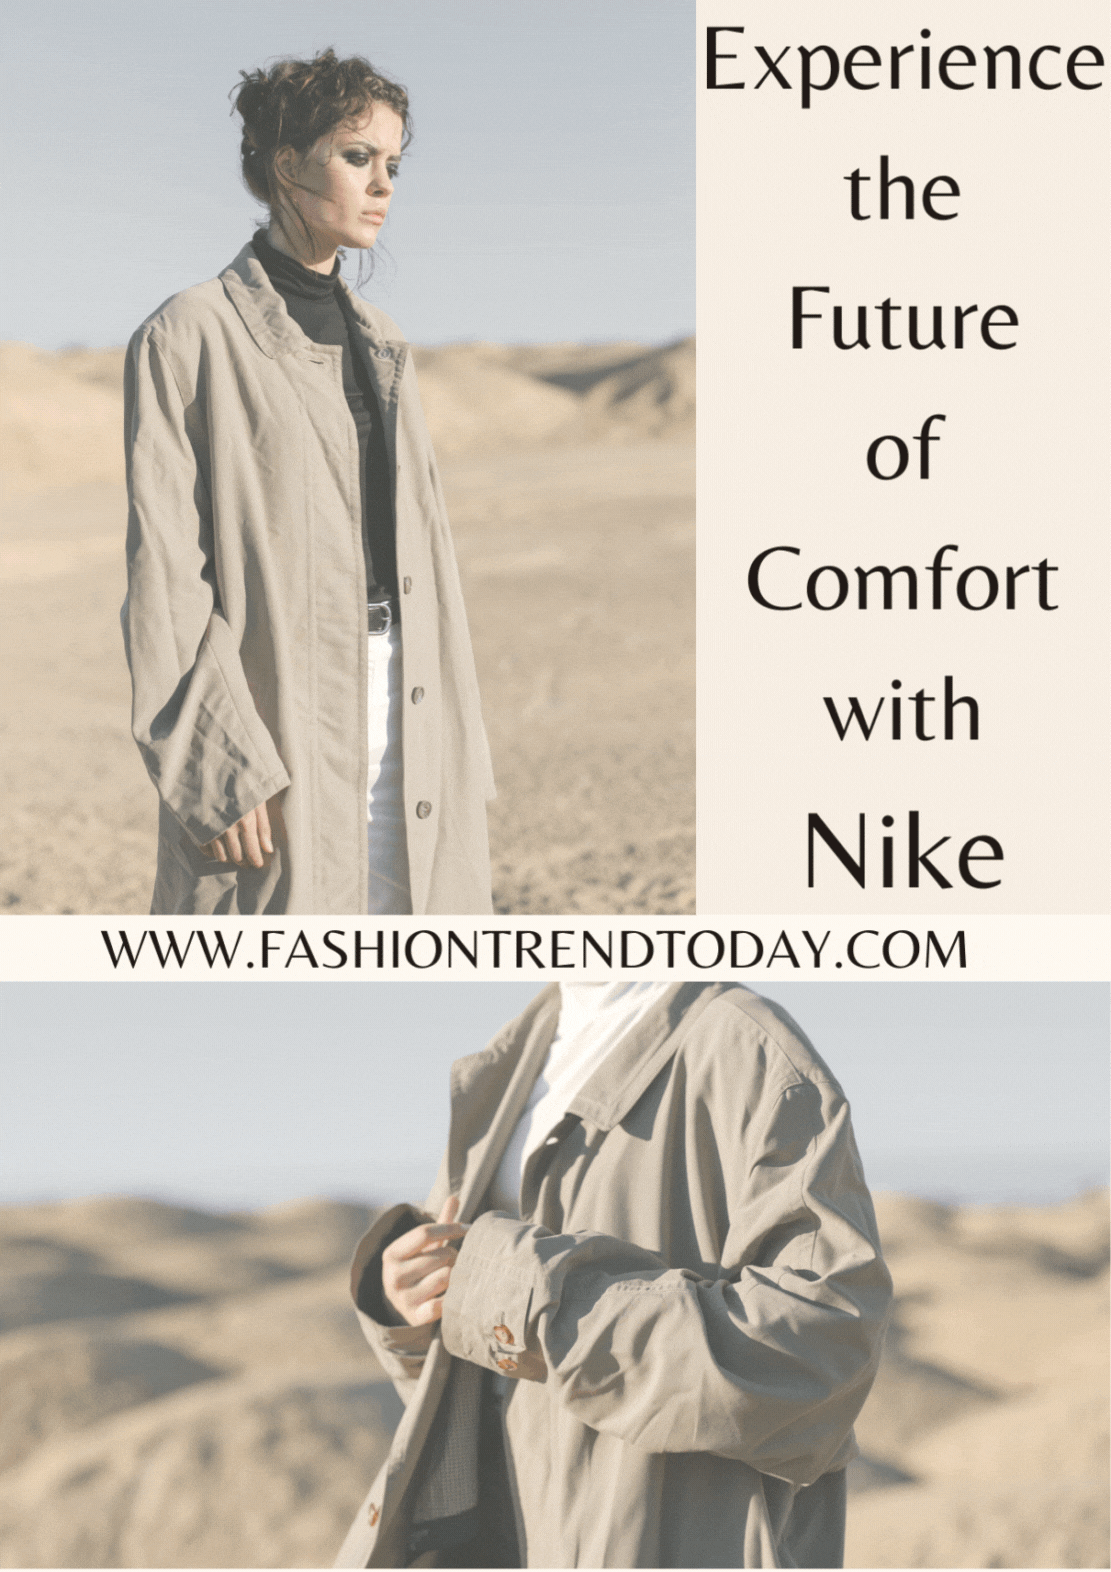 Experience the Future of Comfort with Nike